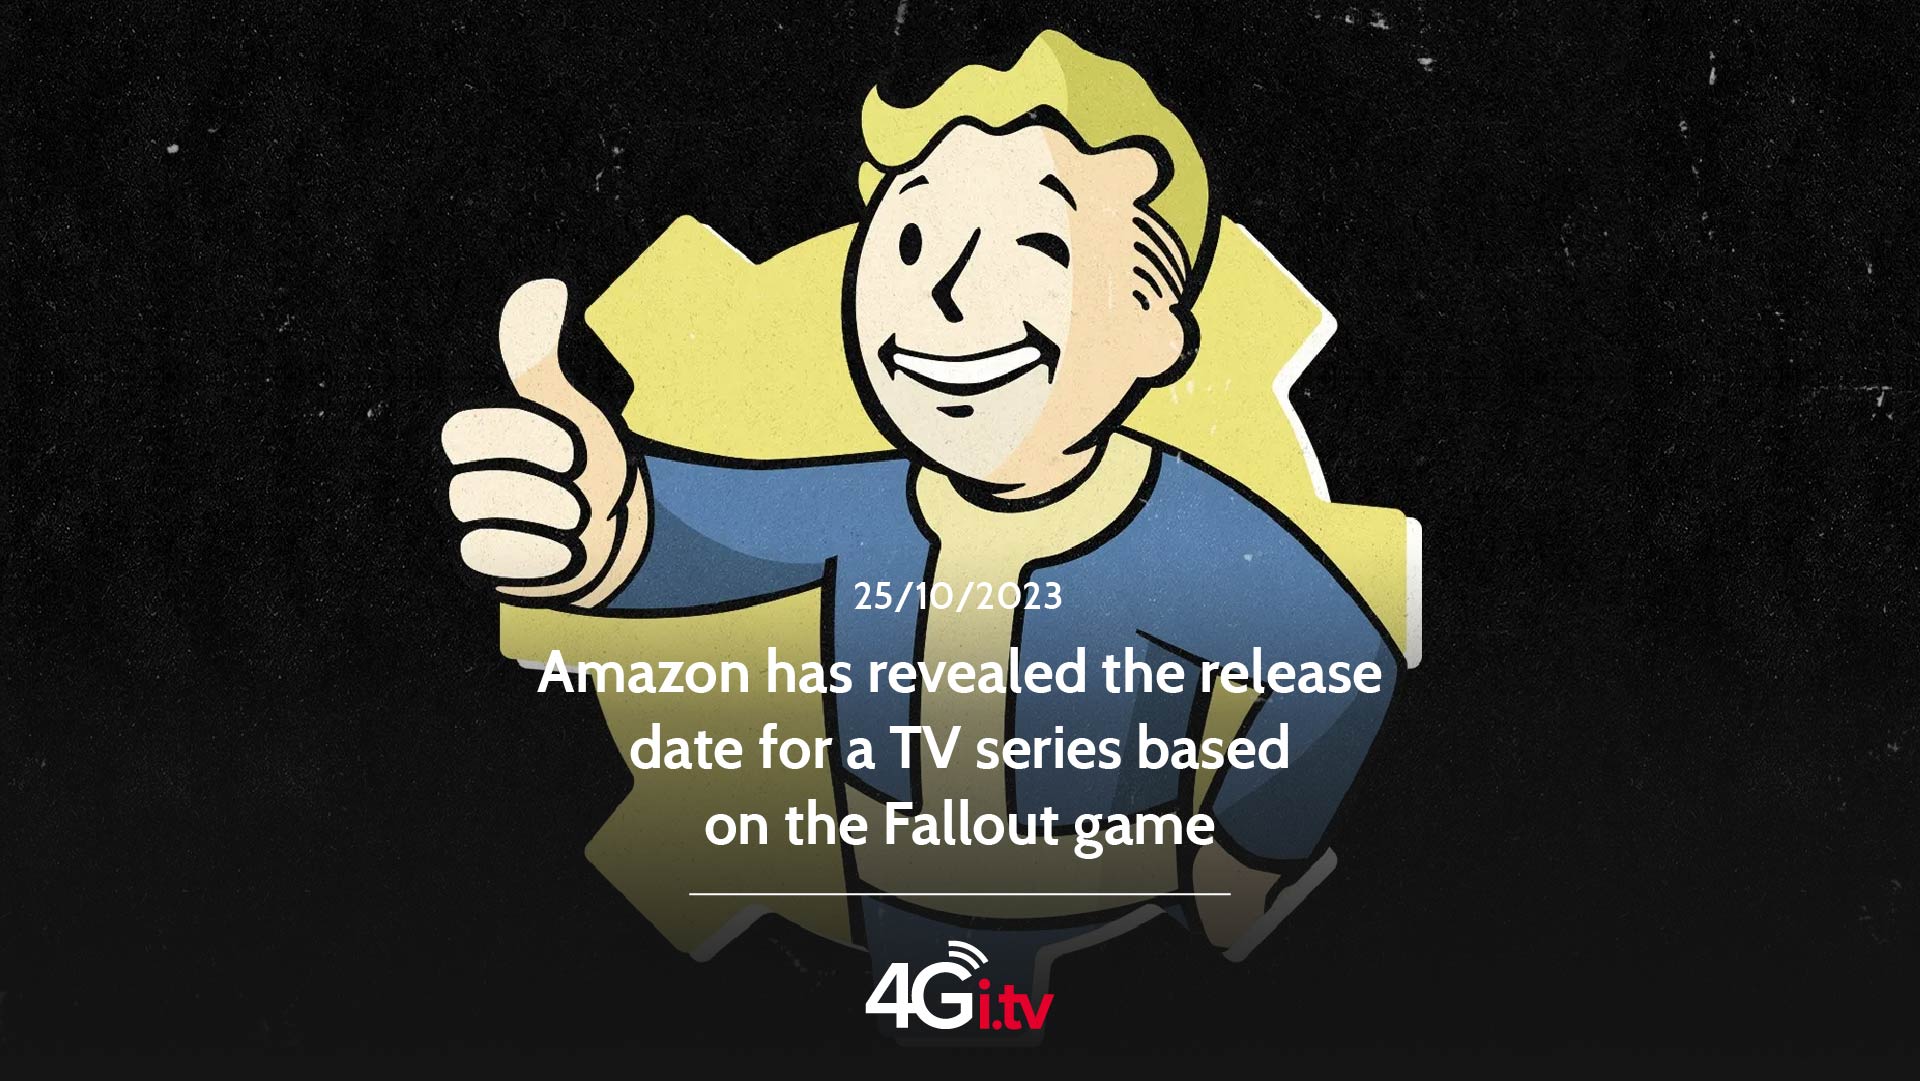 Lesen Sie mehr über den Artikel Amazon has revealed the release date for a TV series based on the Fallout game